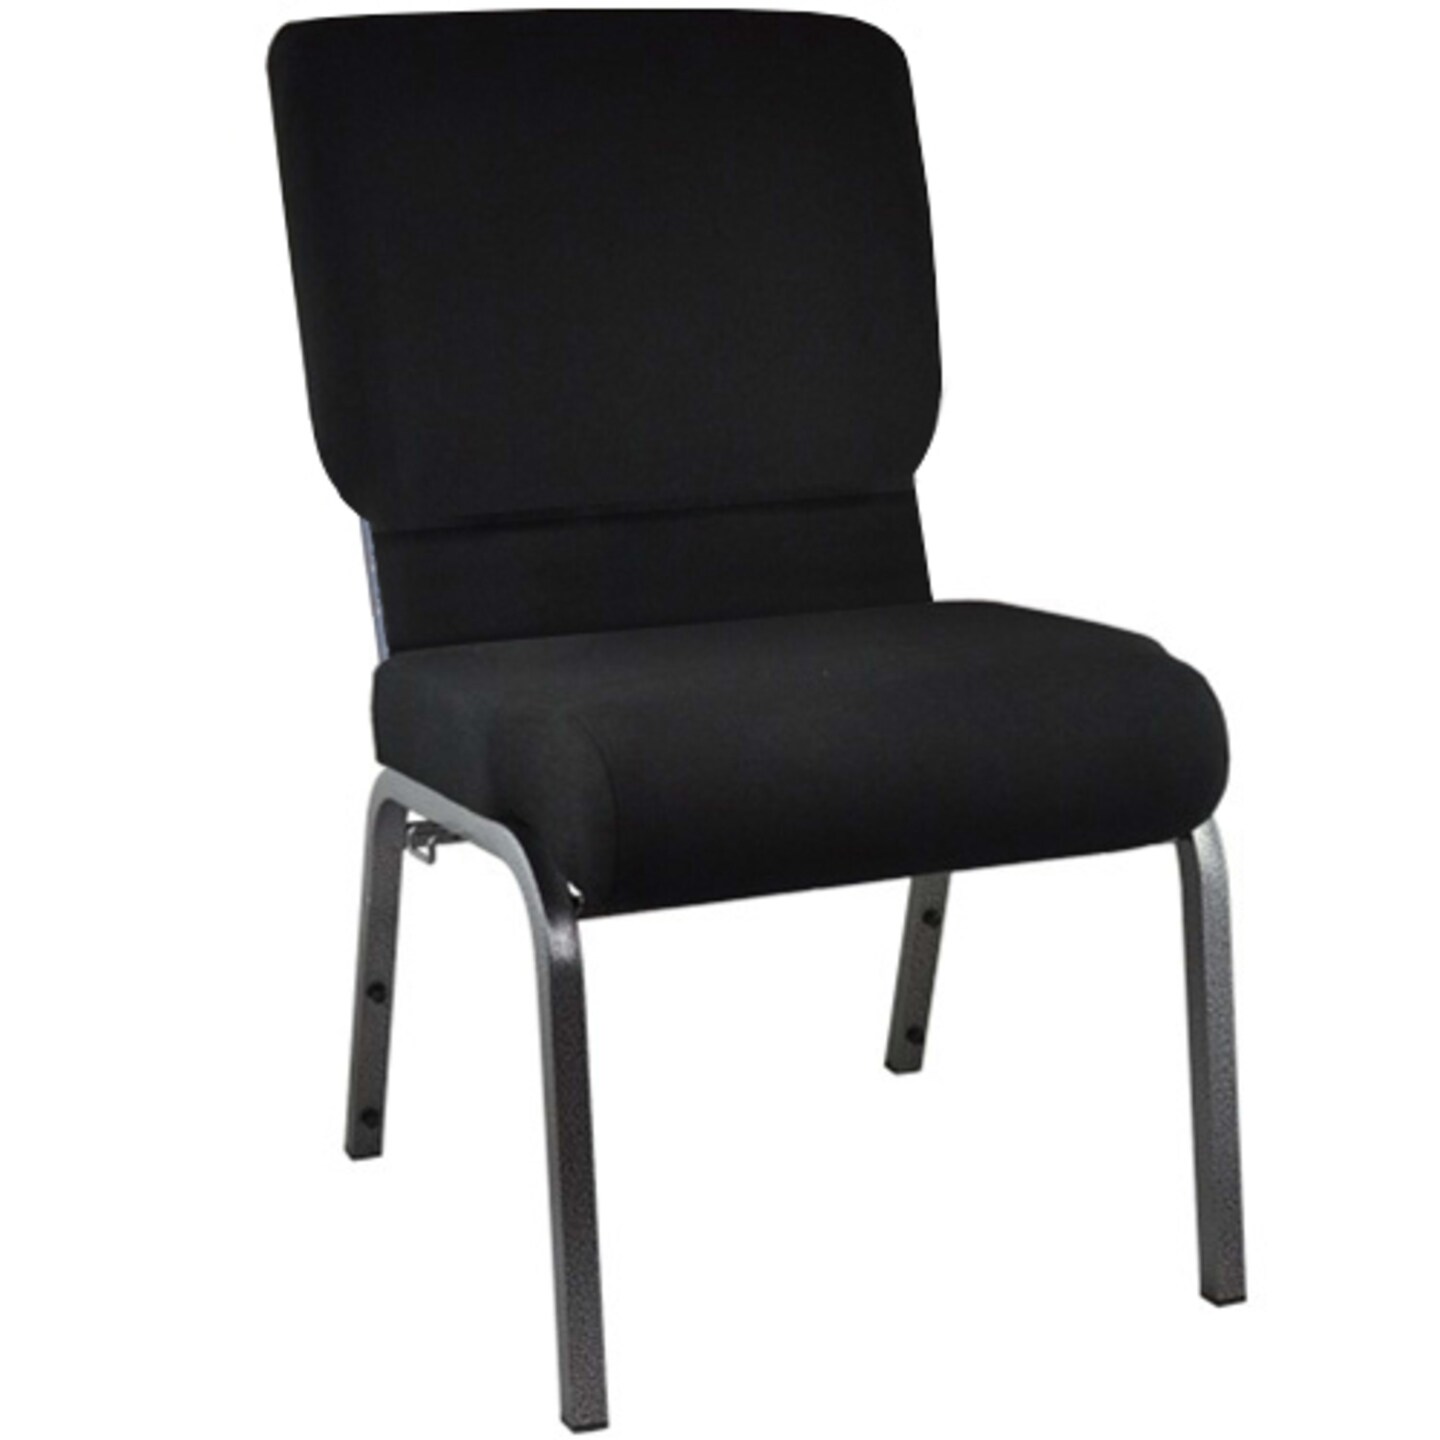 Emma and Oliver Church Chair 20.5 in. Wide